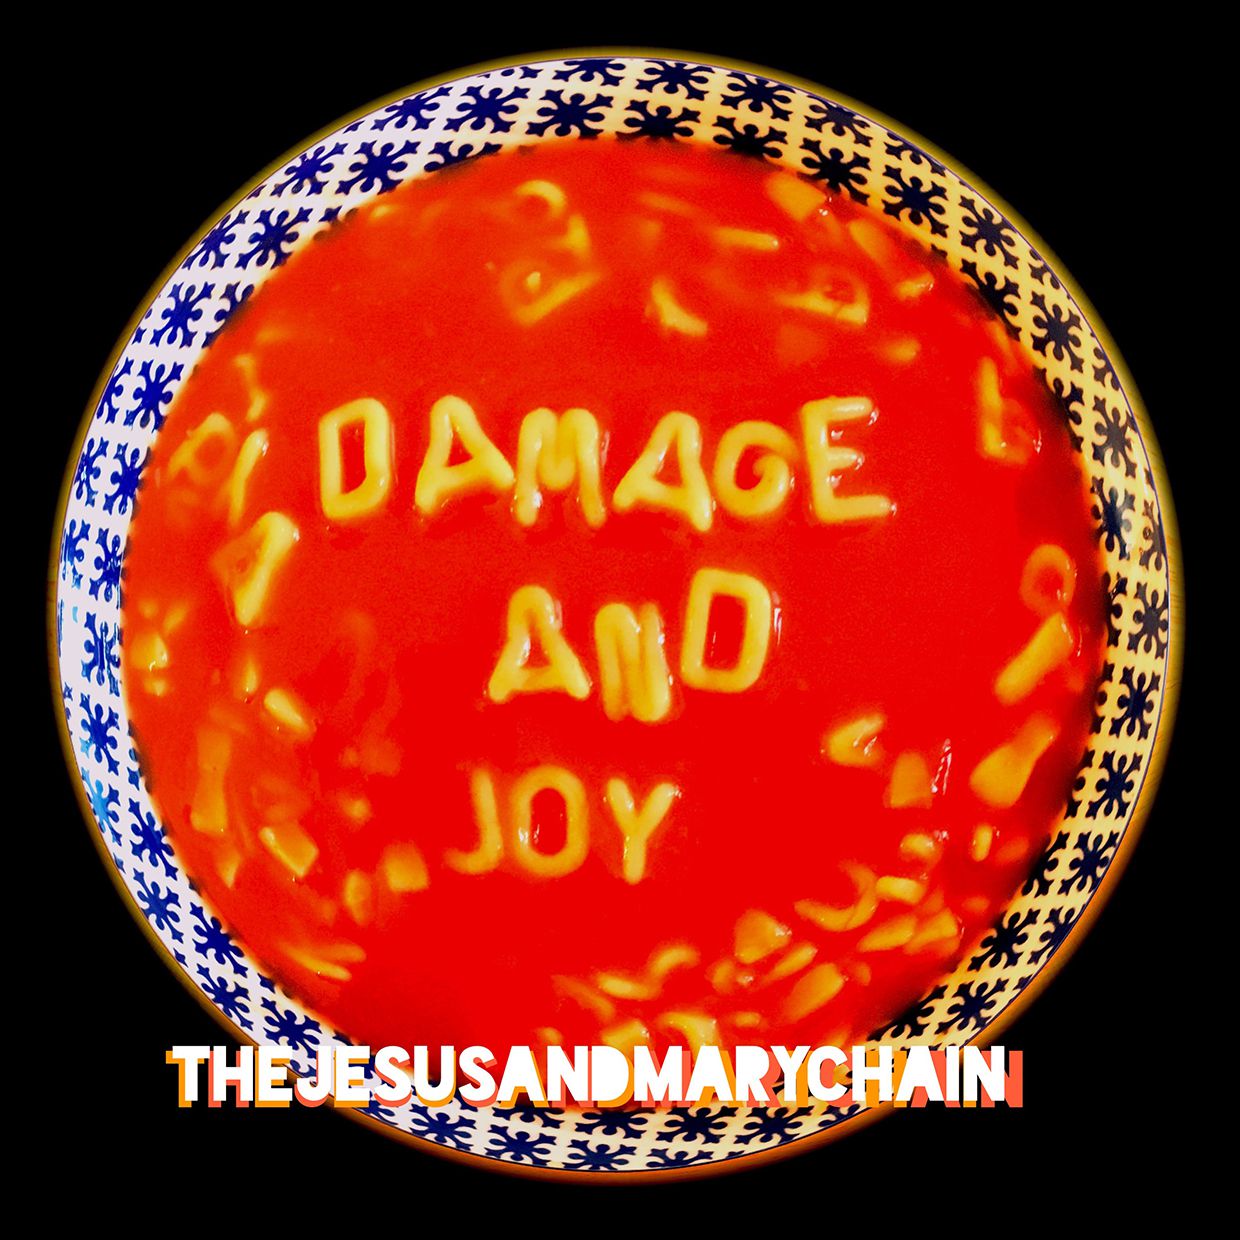 damage joy jesus mary chain stream album download listen The Jesus and Mary Chain release reunion album Damage and Joy: Stream/download